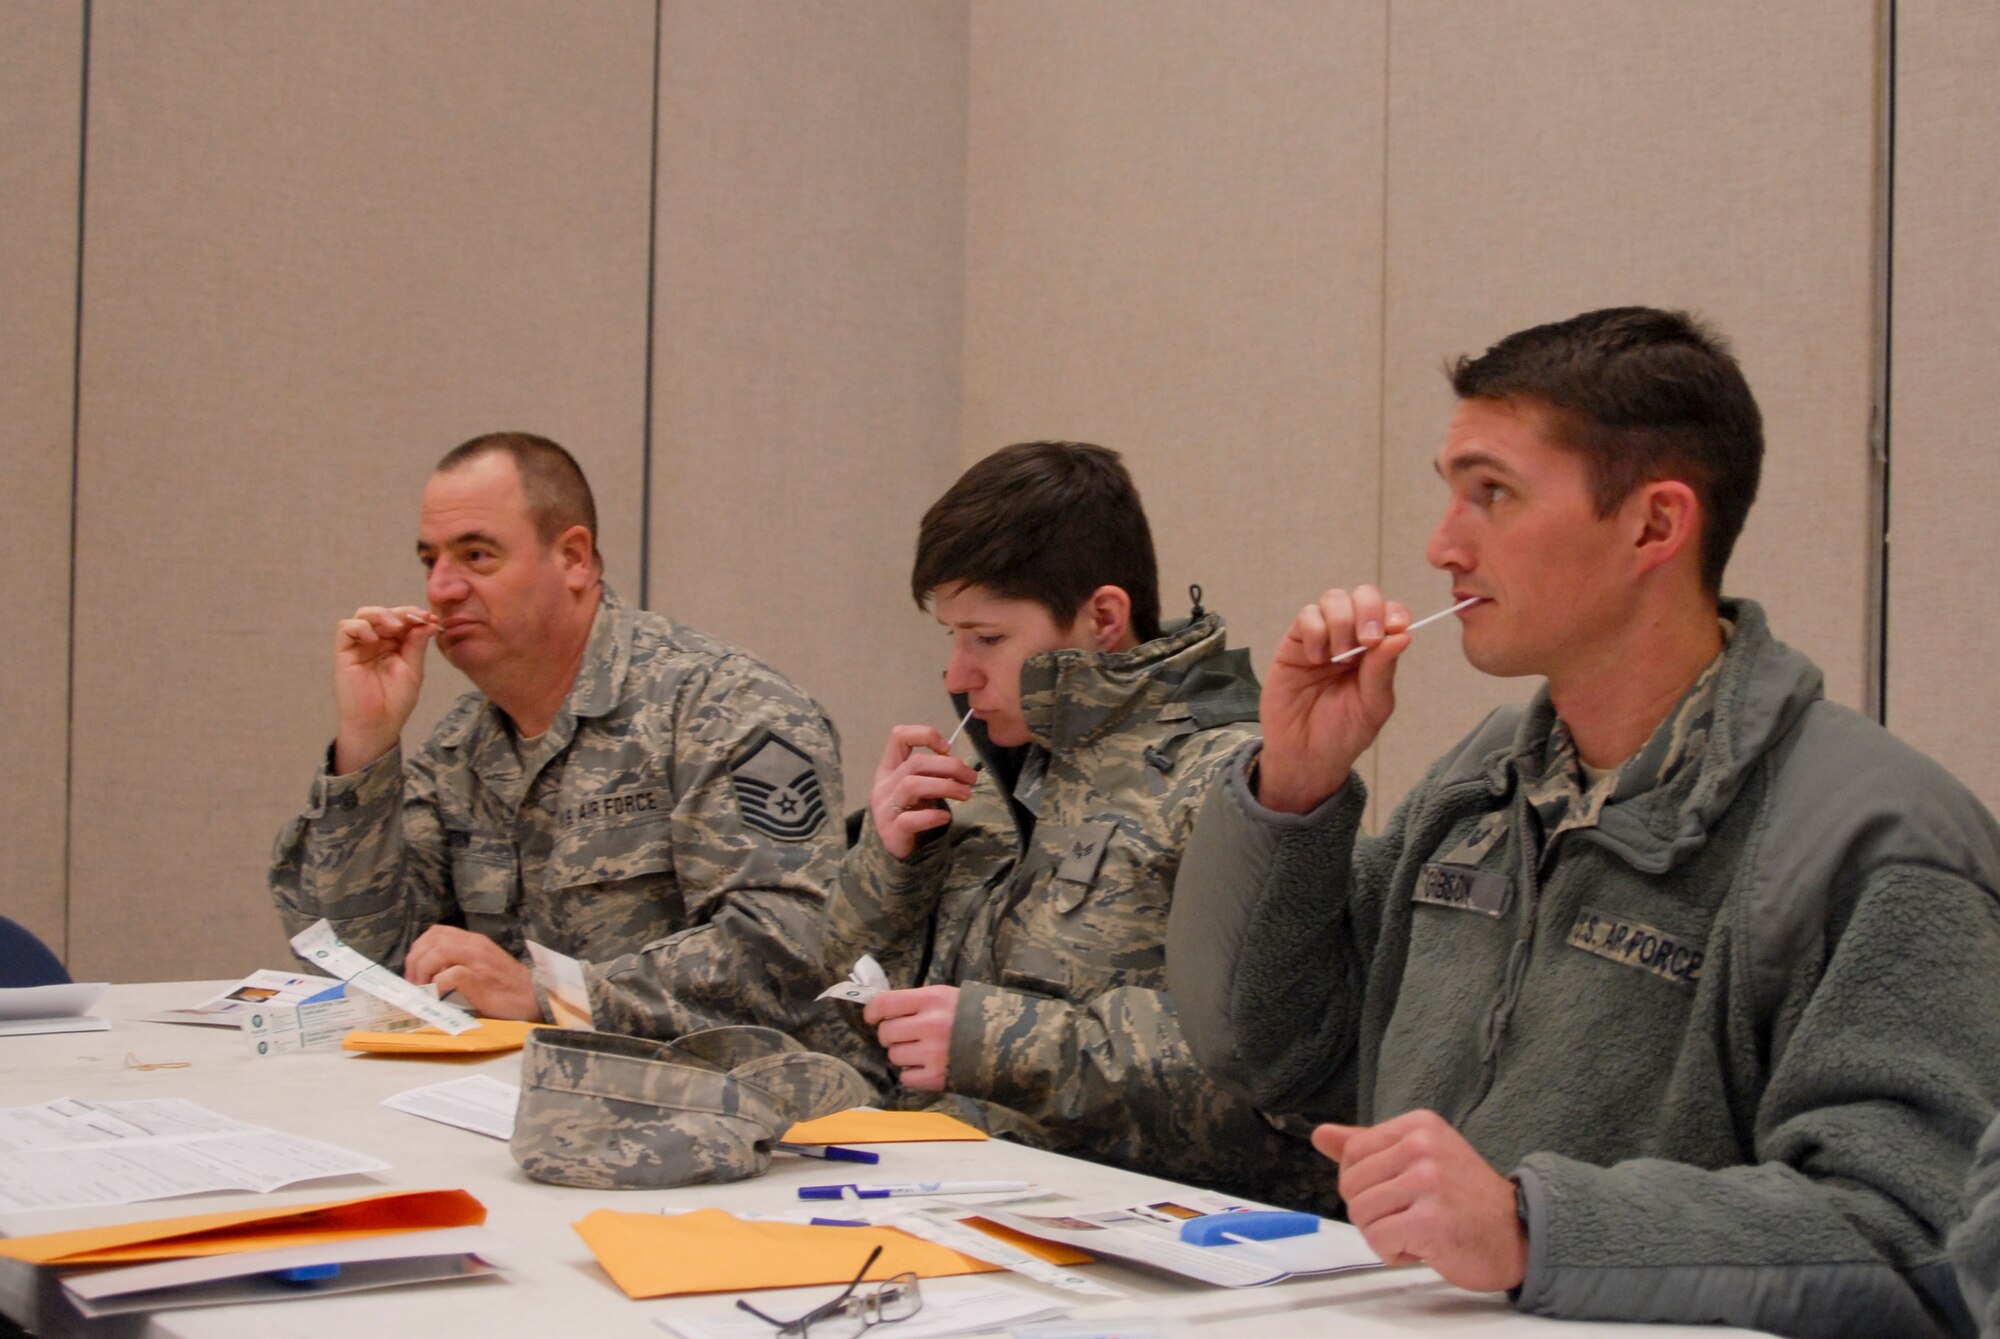 U.S. Air Force Airmen from the 180th Fighter Wing swab the inside of their cheek for the registration process during the wing's two-day bone marrow registration drive Jan. 10 2015, part of the Salute to Life Program. The Salute to Life Program, also known as the C.W. Bill Young/Department of Defense Marrow Donor Program, works with active duty and their dependents, guard, reservist and Department of Defense civilian employees to facilitate marrow and stem cell donations. All of the donors are volunteers and since the program inception in 1991, more than 750,000 individuals to fight against blood cancer and other fatal diseases.  Air National Guard photo by Senior Master Sgt. Beth Holliker (Released)